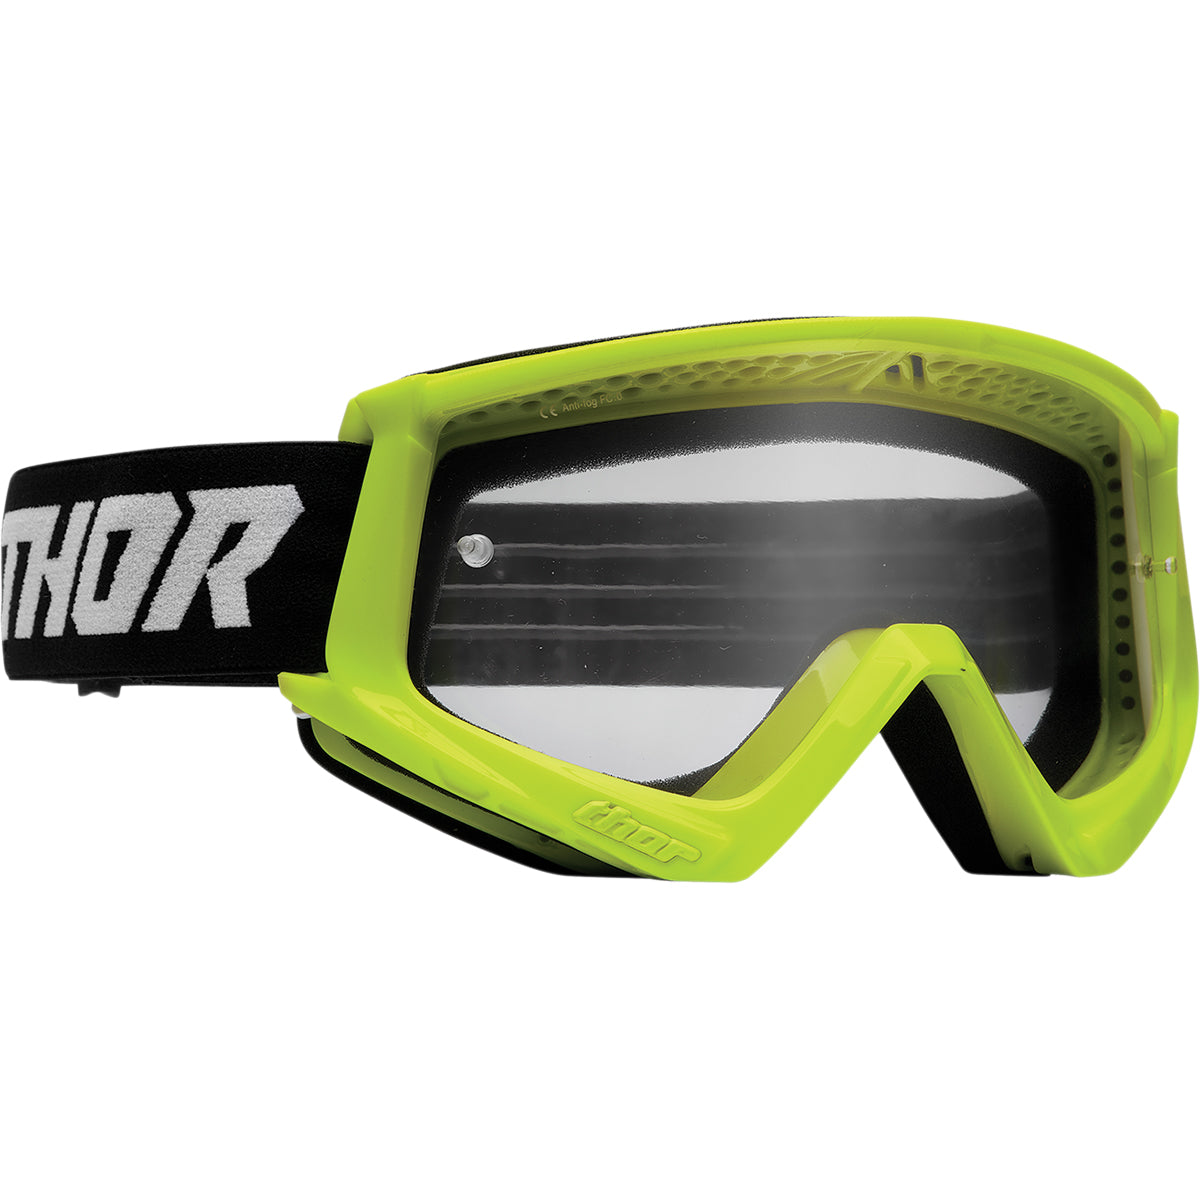 THOR Youth Combat Racer Goggles